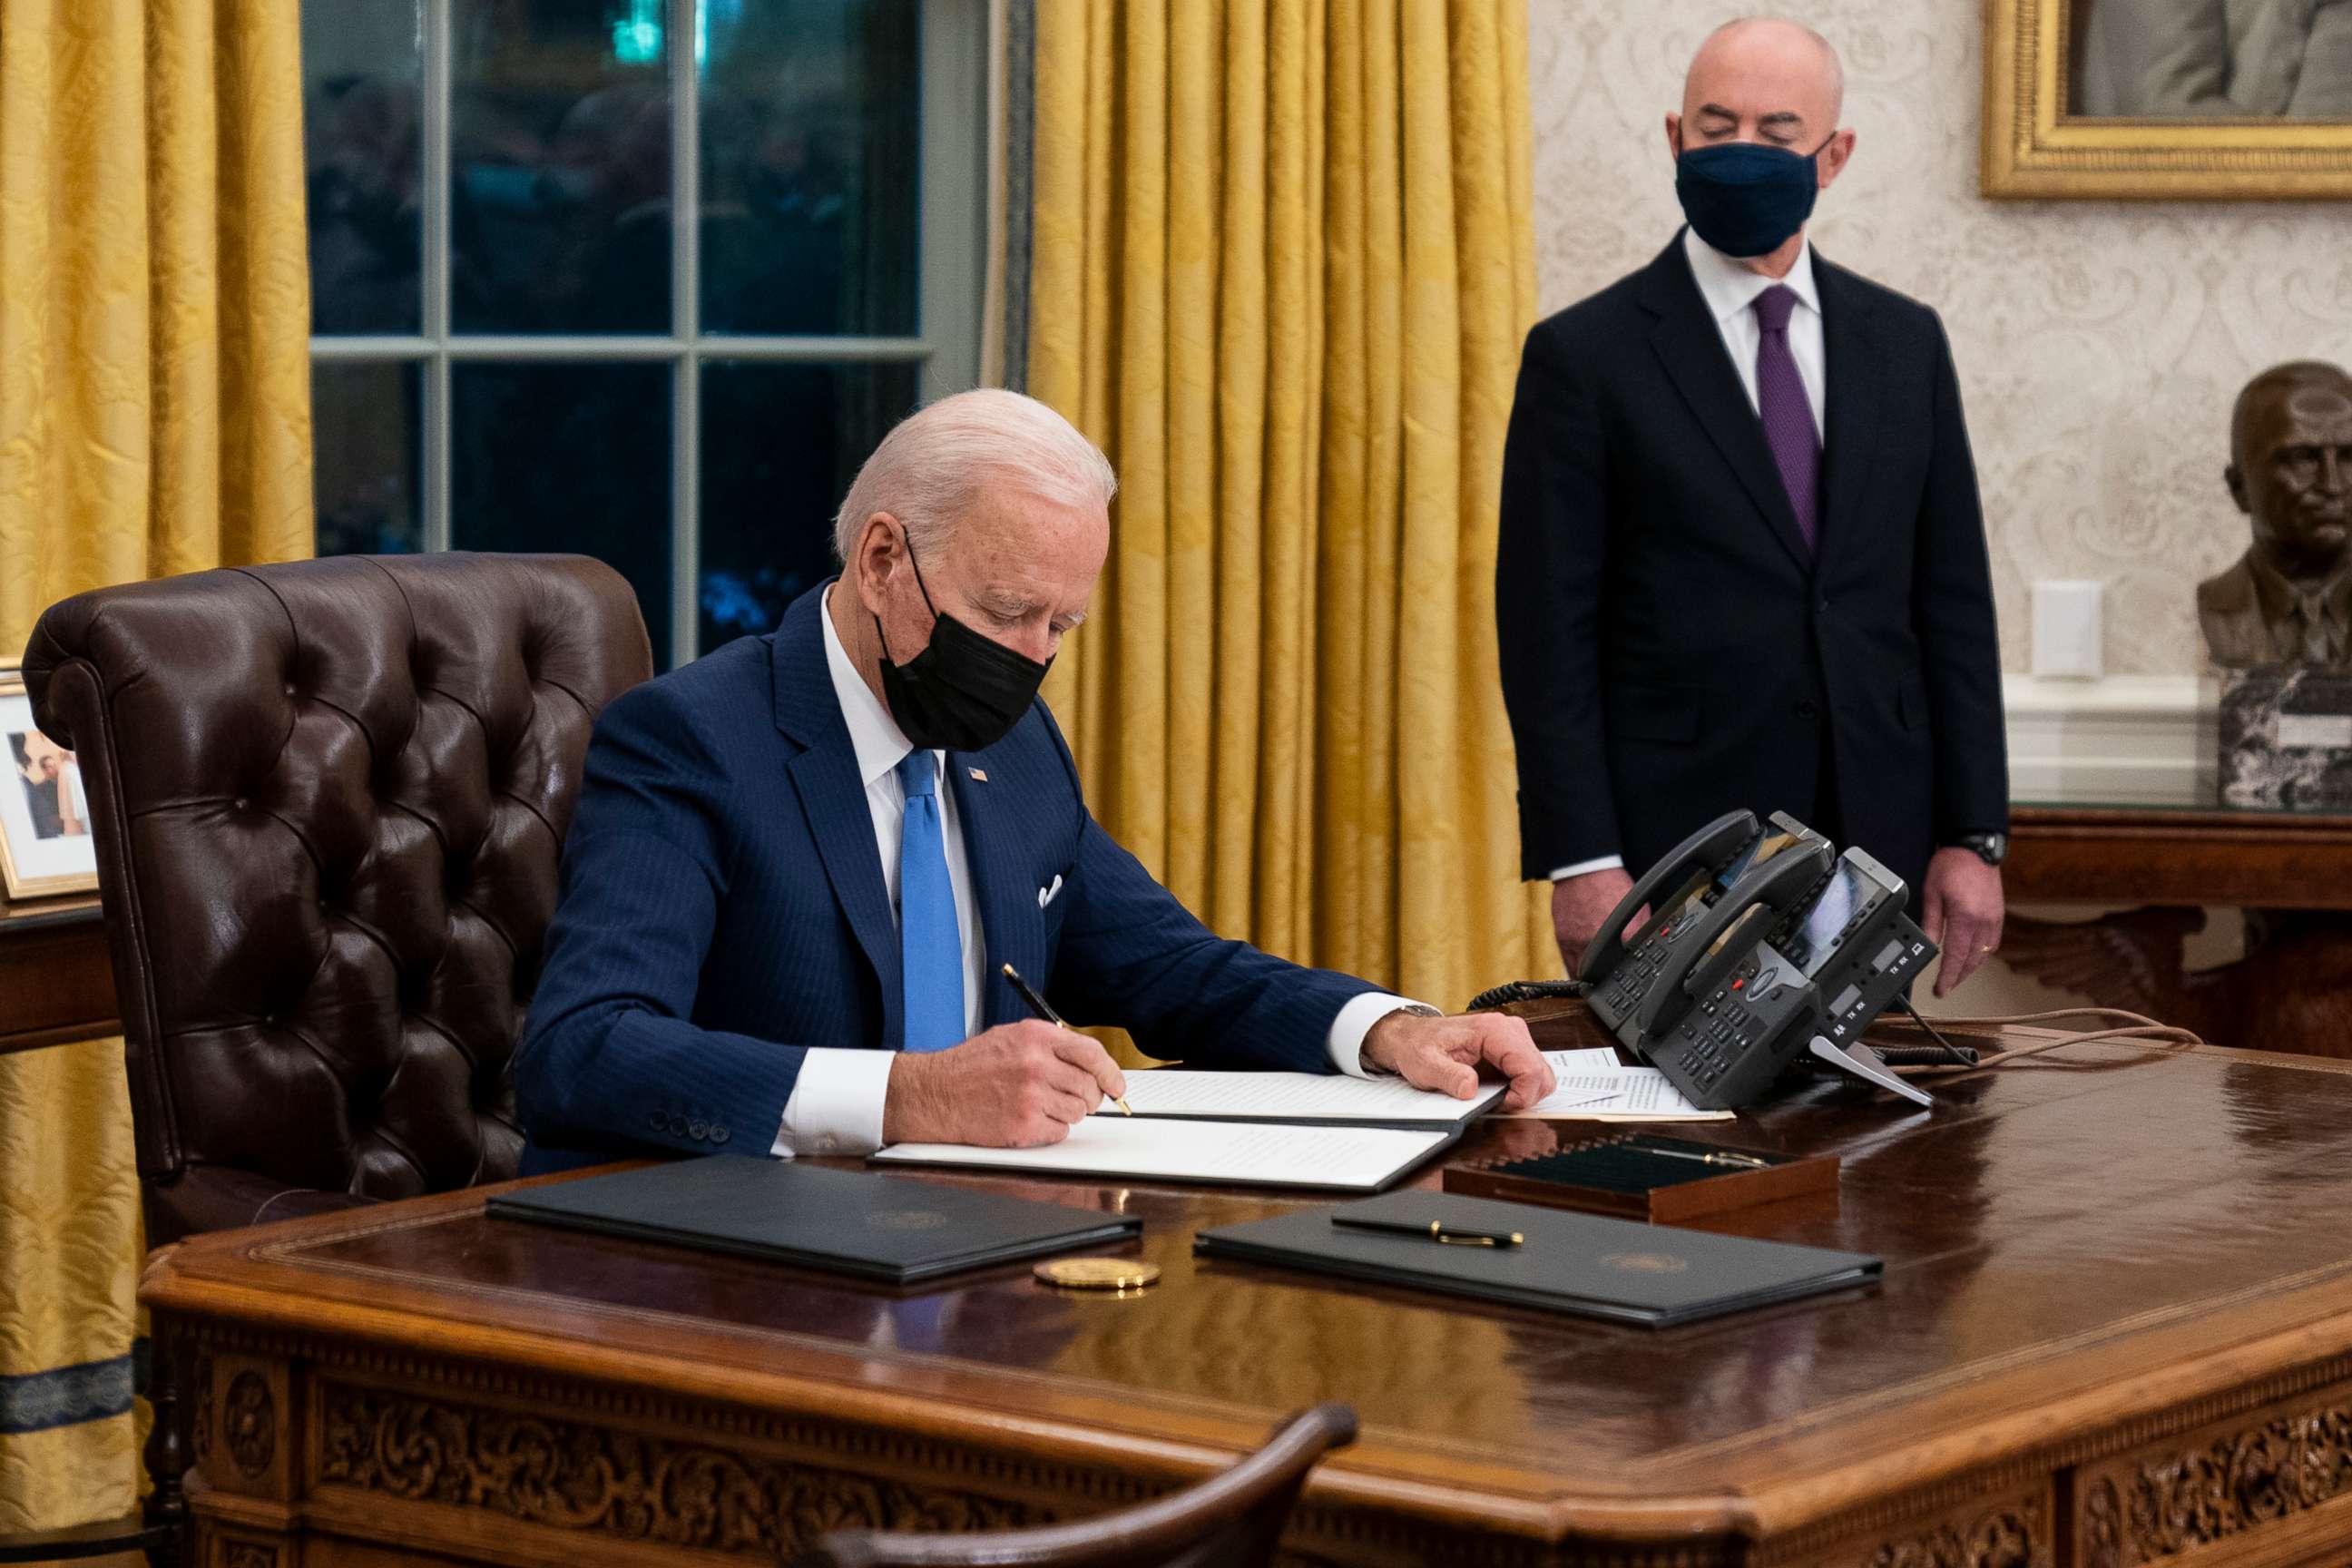 PHOTO: Secretary of Homeland Security Alejandro Mayorkas looks on as President Joe Biden signs an executive order on immigration, in the Oval Office of the White House, Feb. 2, 2021, in Washington, D.C.